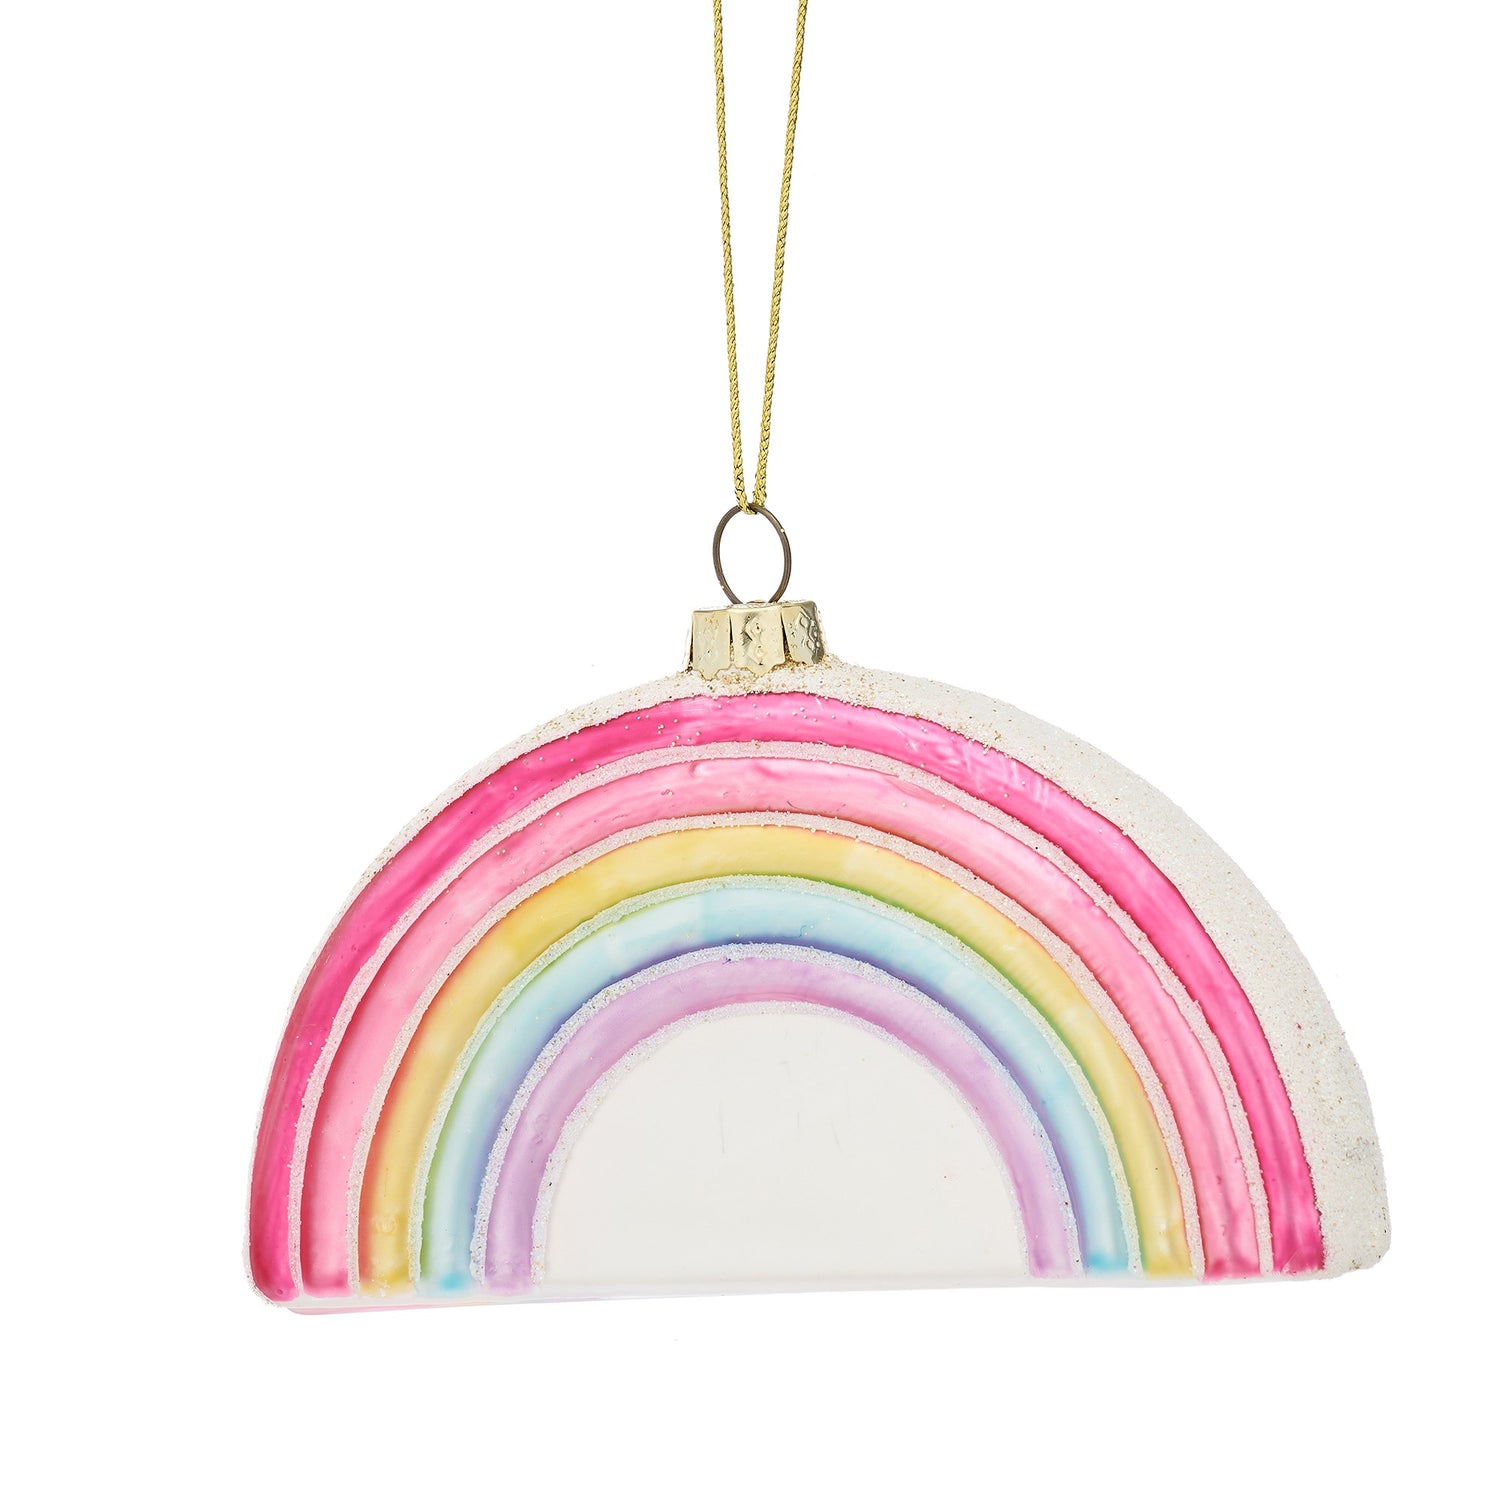 Create a magical fairytale world with this pretty pastel coloured rainbow glass Christmas tree decoration!